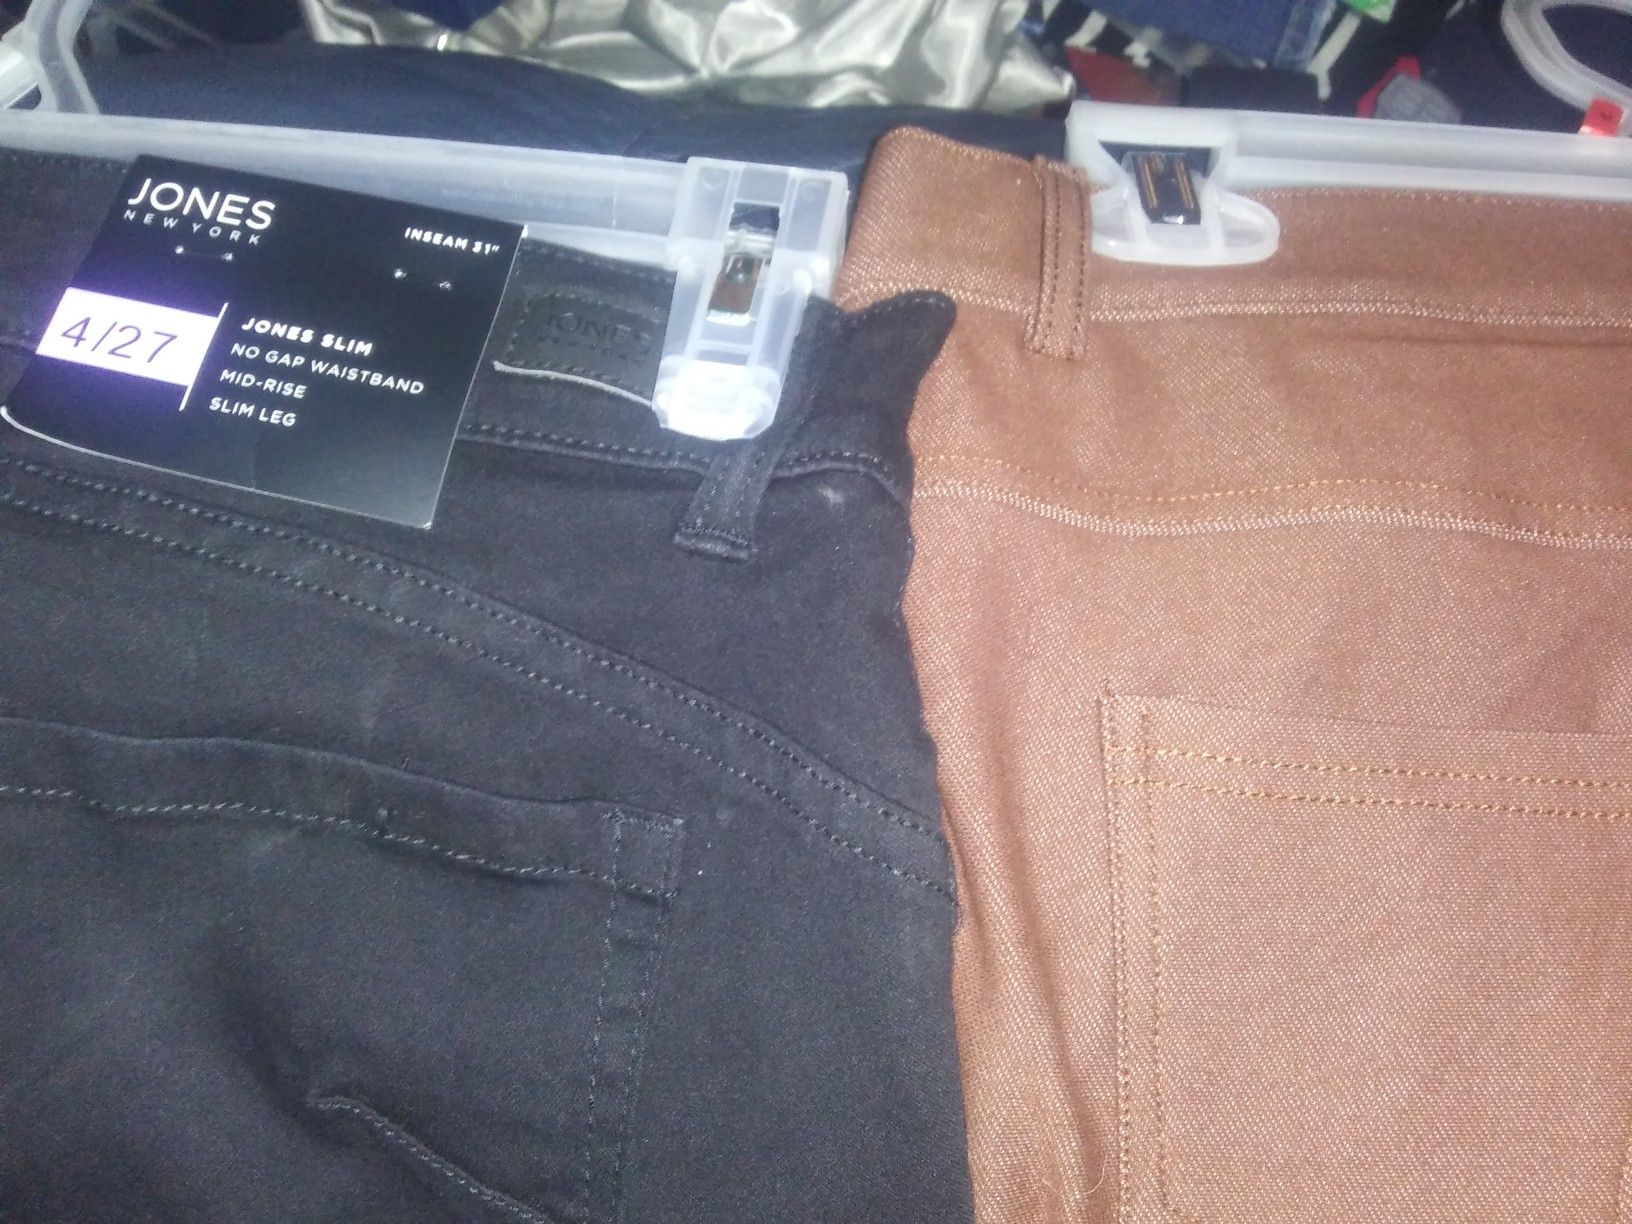 Brand new pants two pair